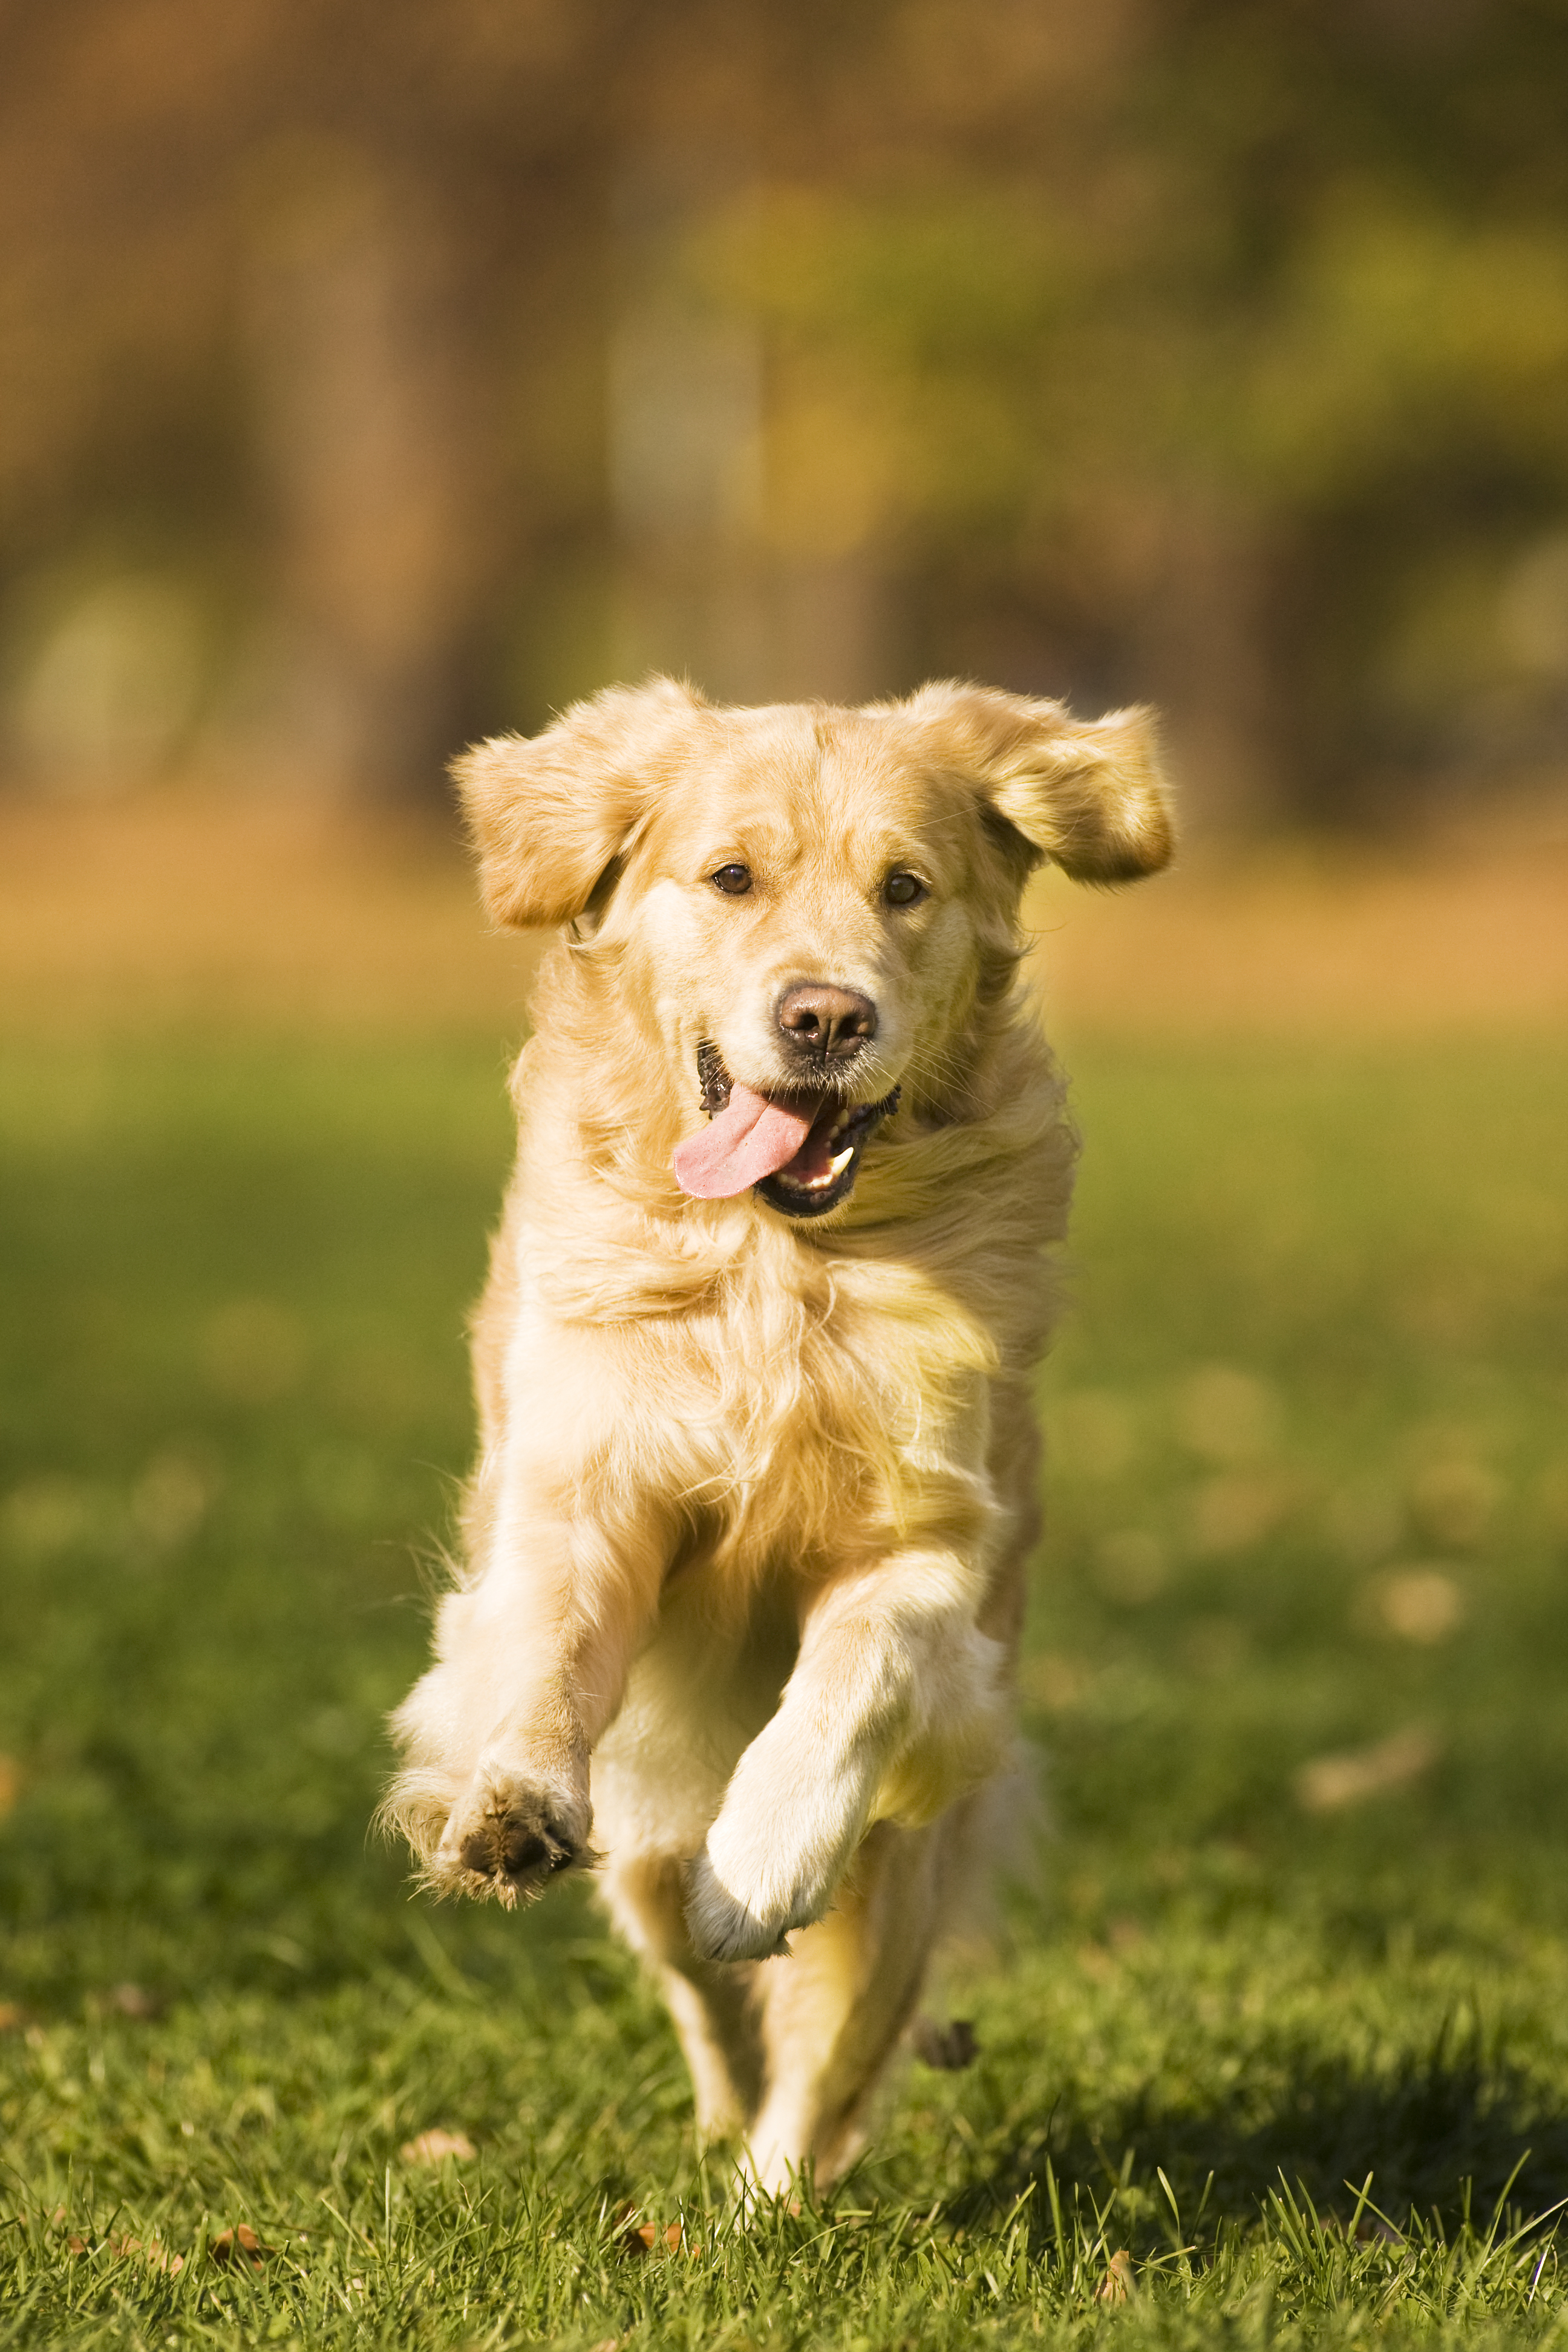 Golden retriever running on grass with tongue hanging out right side of mouth